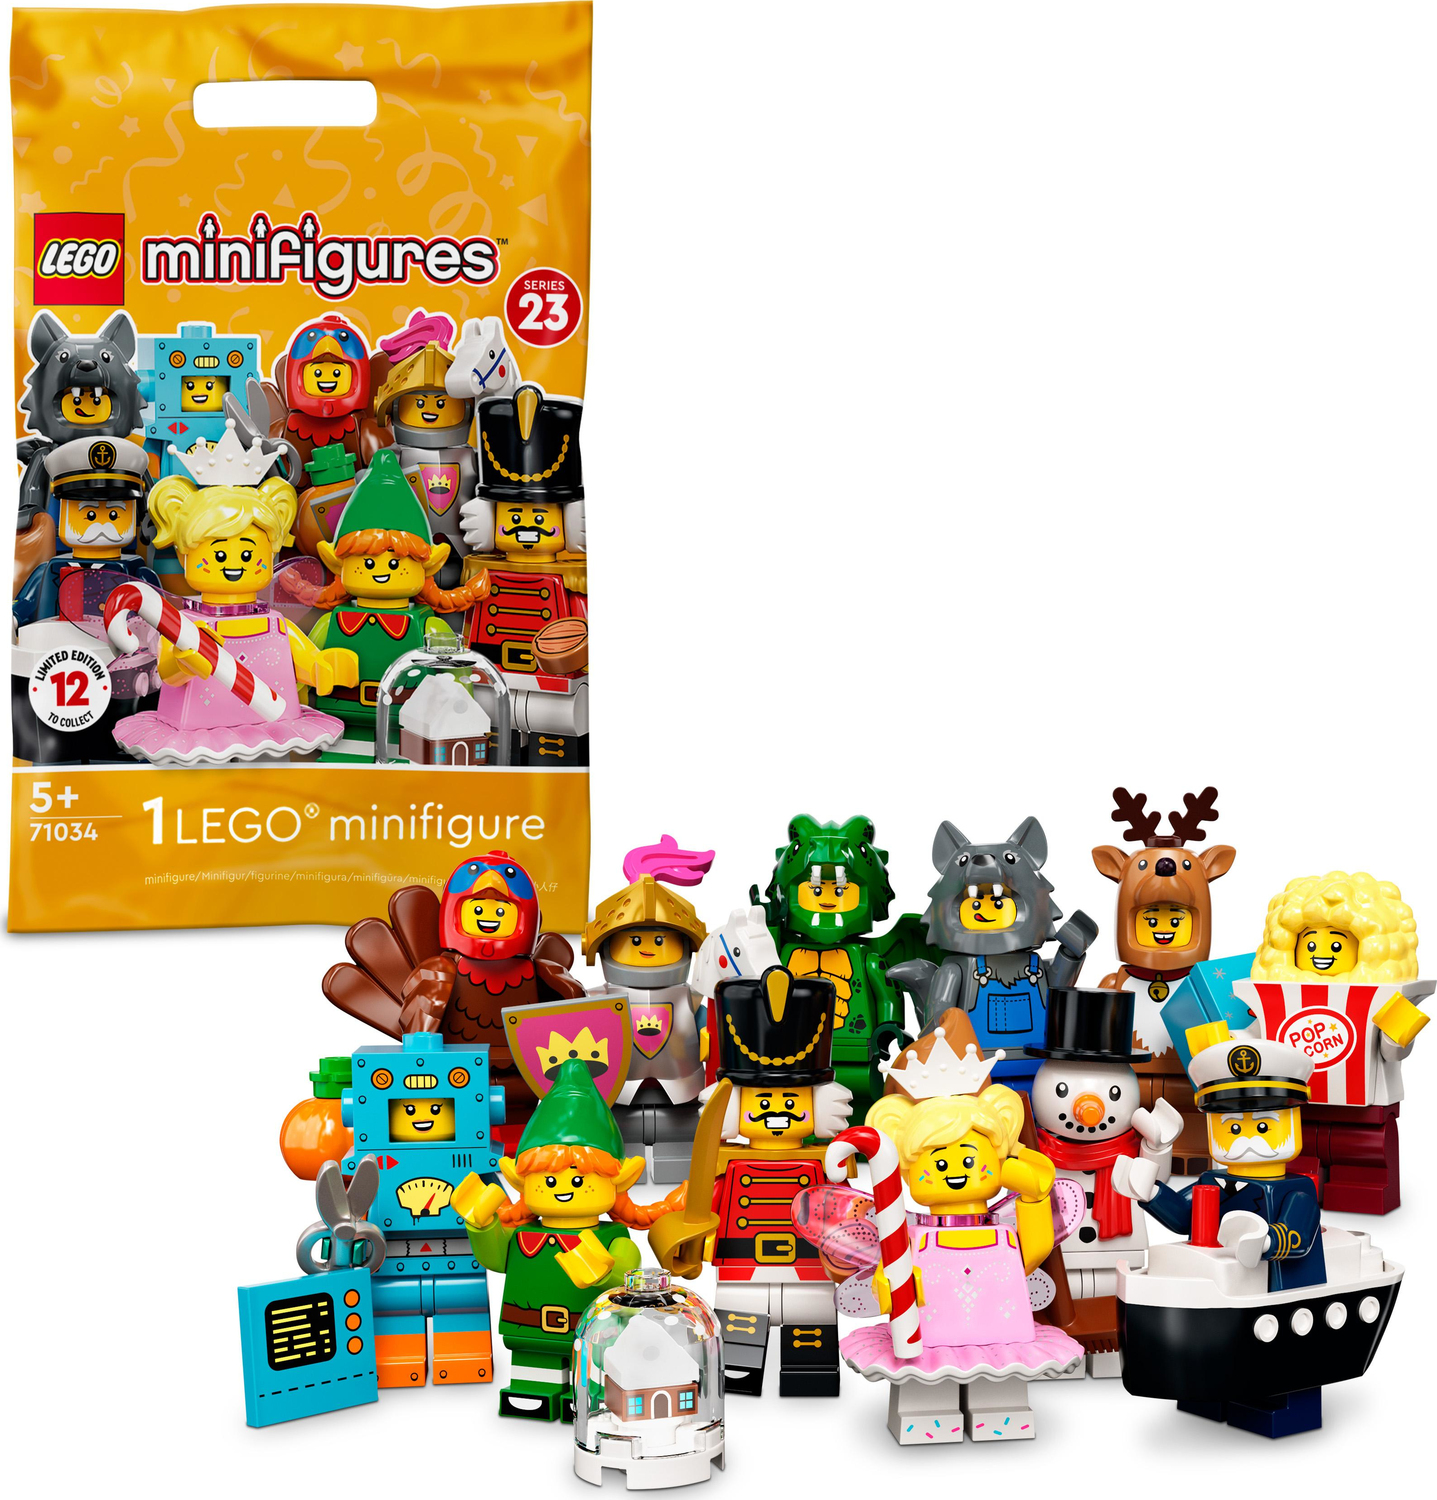 to uger Intens Suri LEGO Minifigures Series 23 Limited Edition Set - Imagination Toys